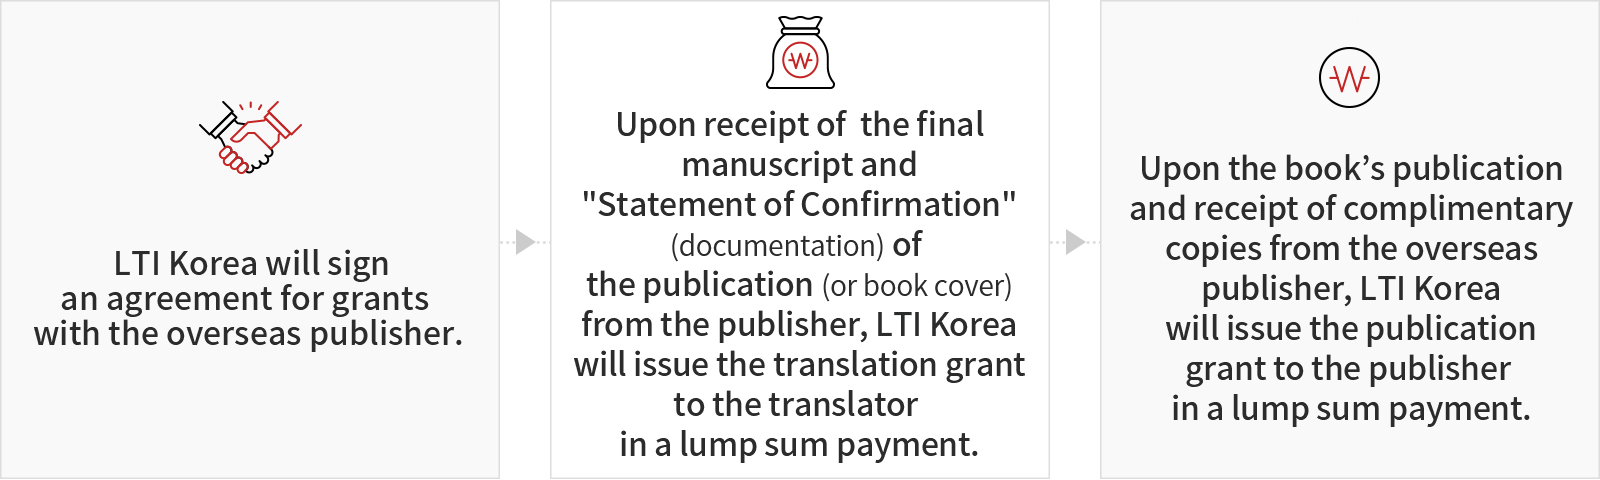 1) Signing of grant contract (between overseas publisher and LTI Korea) > 2) Grant funds are to be allocated in a lump sum payment made upon delivery of the final publication manuscript and publication confirmation form by the publisher in accordance with the contract > 3) Payment will be made in a lump sum upon confirmation of the publisher sample copy in accordance with the contract